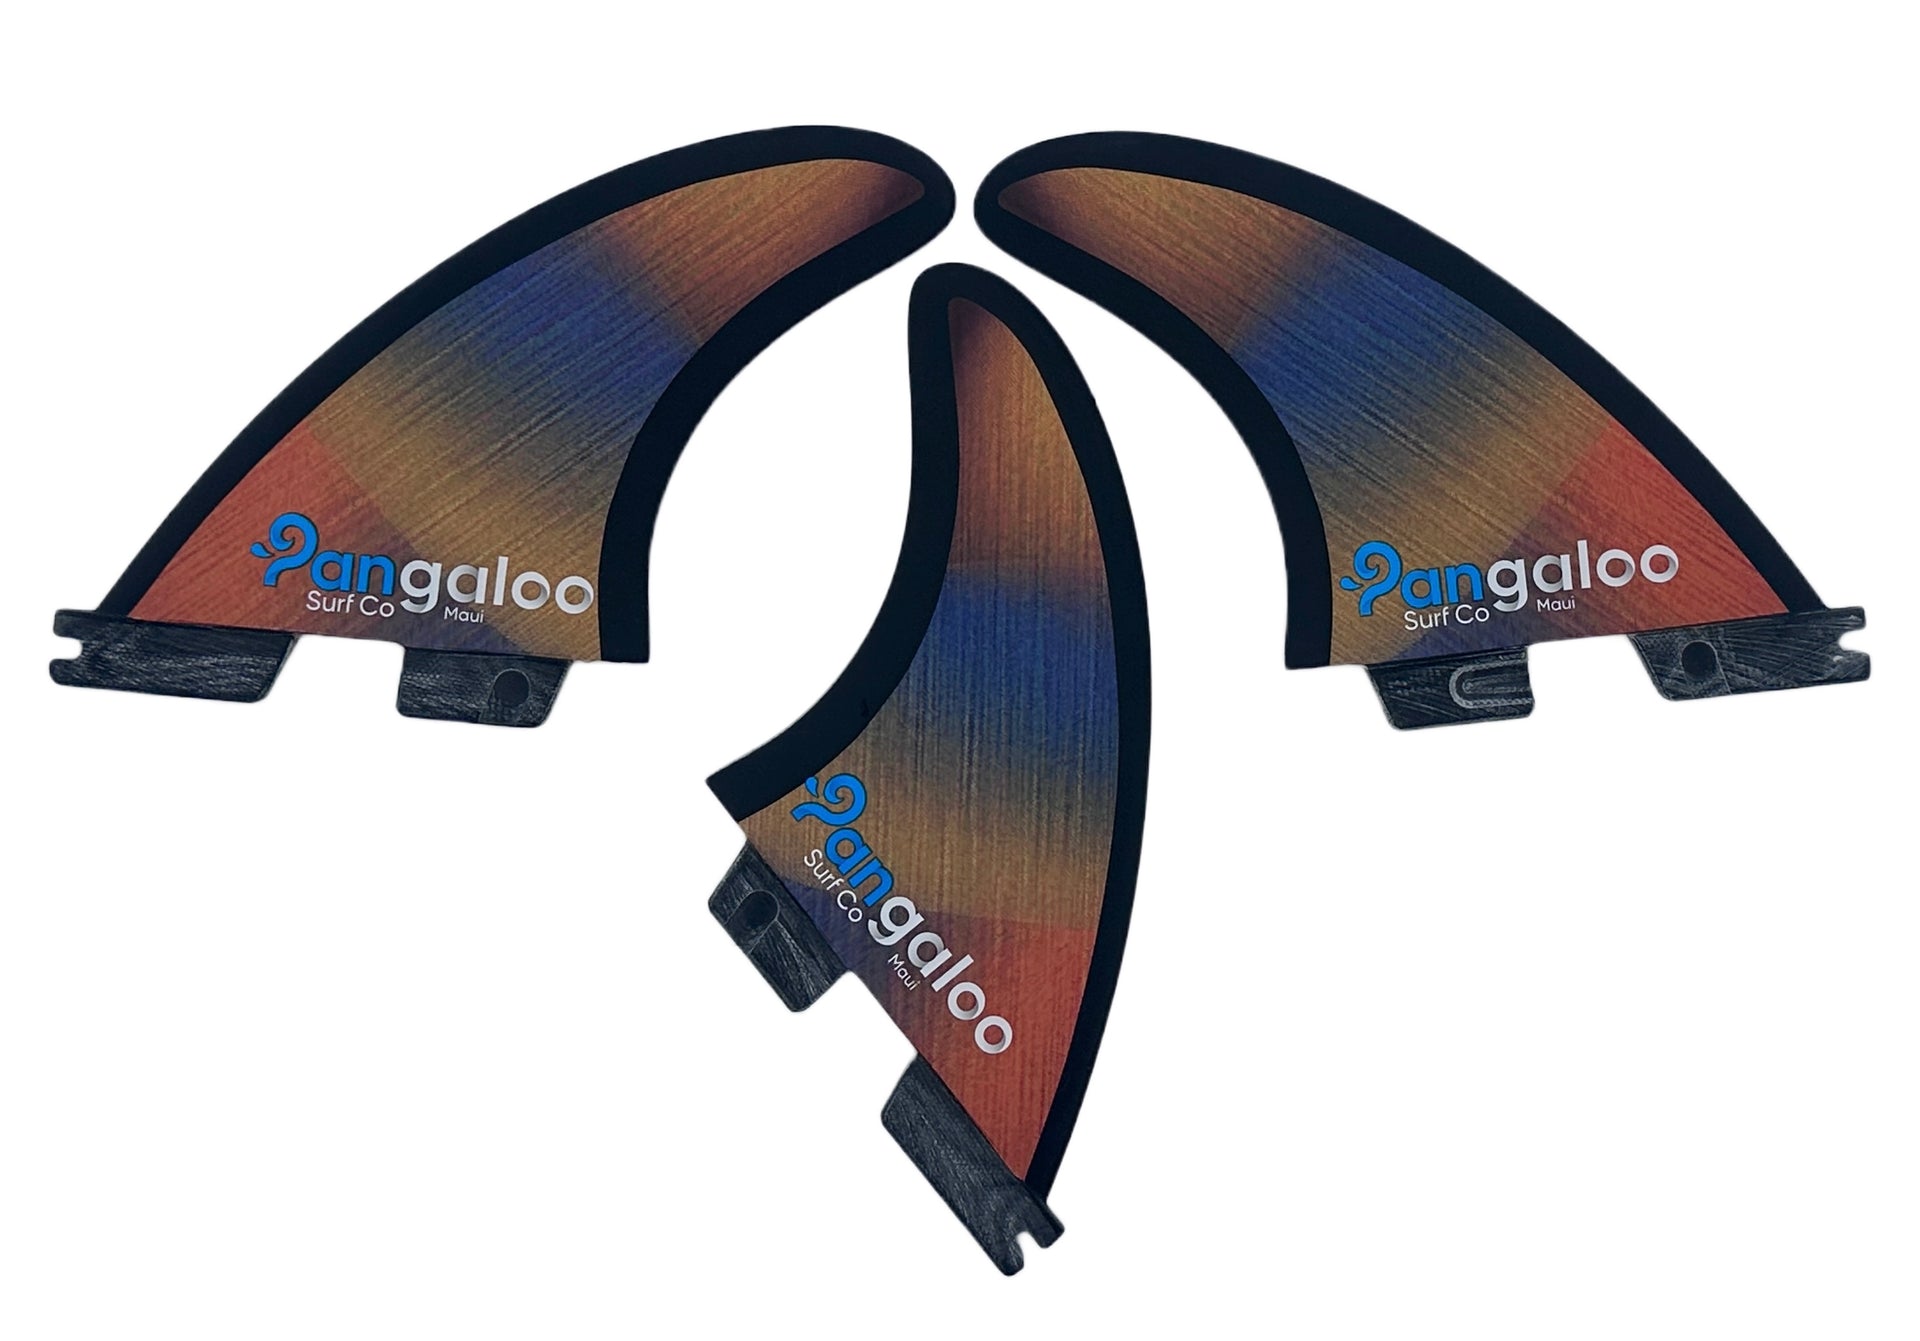 Thruster Surf - Surf Box Co Fins Size - Fin – Small Pangaloo FCSII (Prismatic)